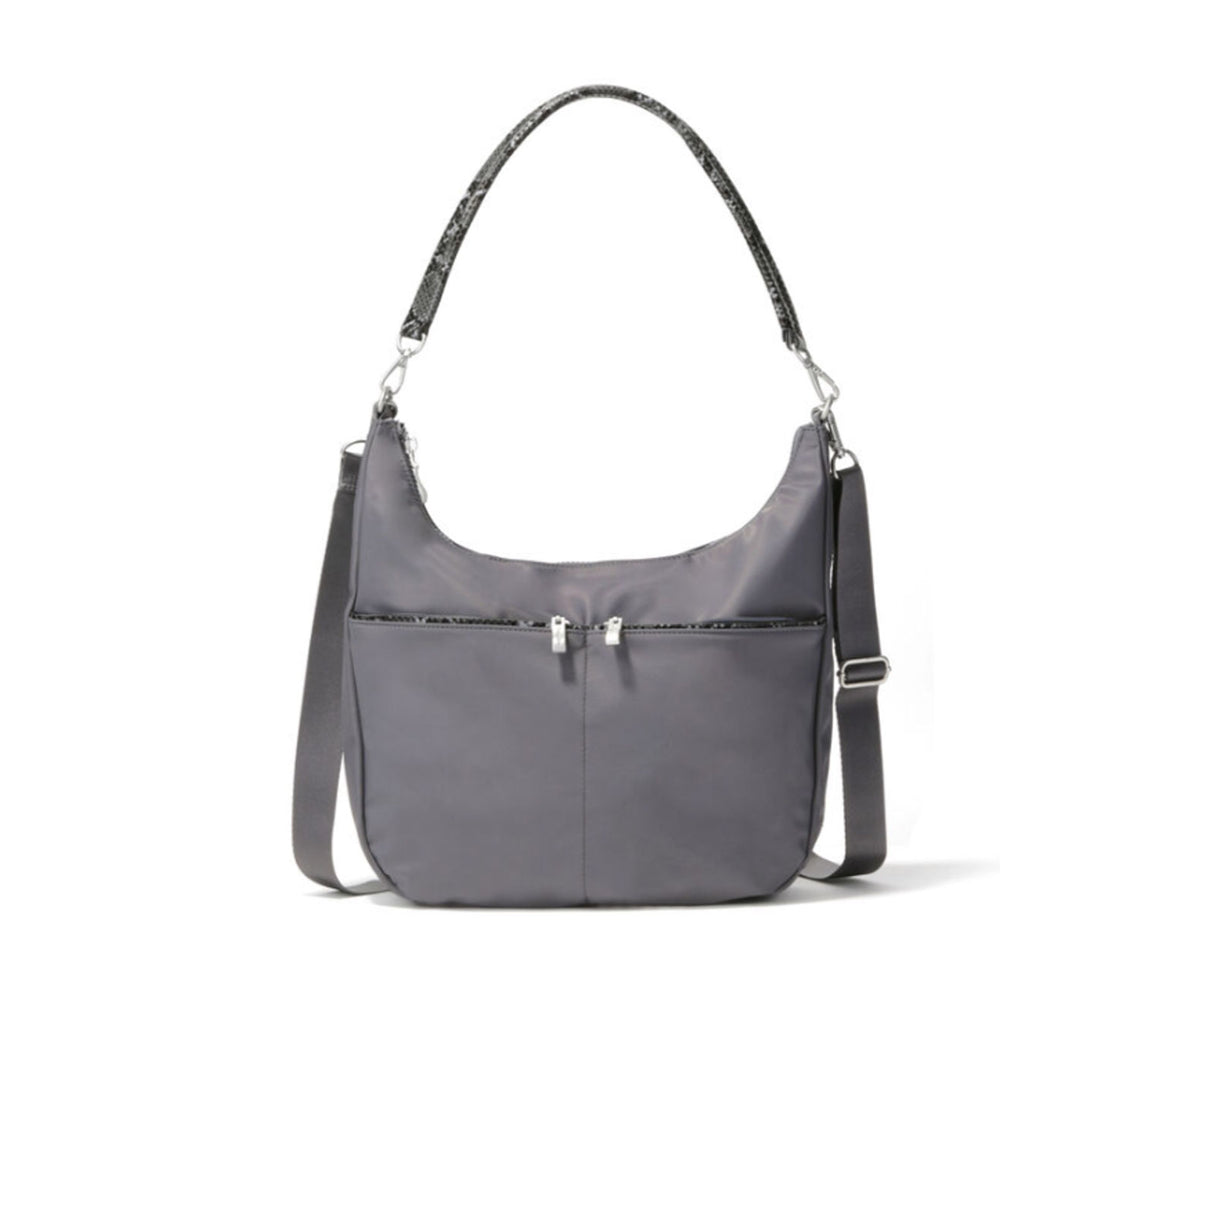 Baggallini Bowery Large Half Moon Bag - Smoke/Faux Python Accessories - Bags - Handbags - The Heel Shoe Fitters